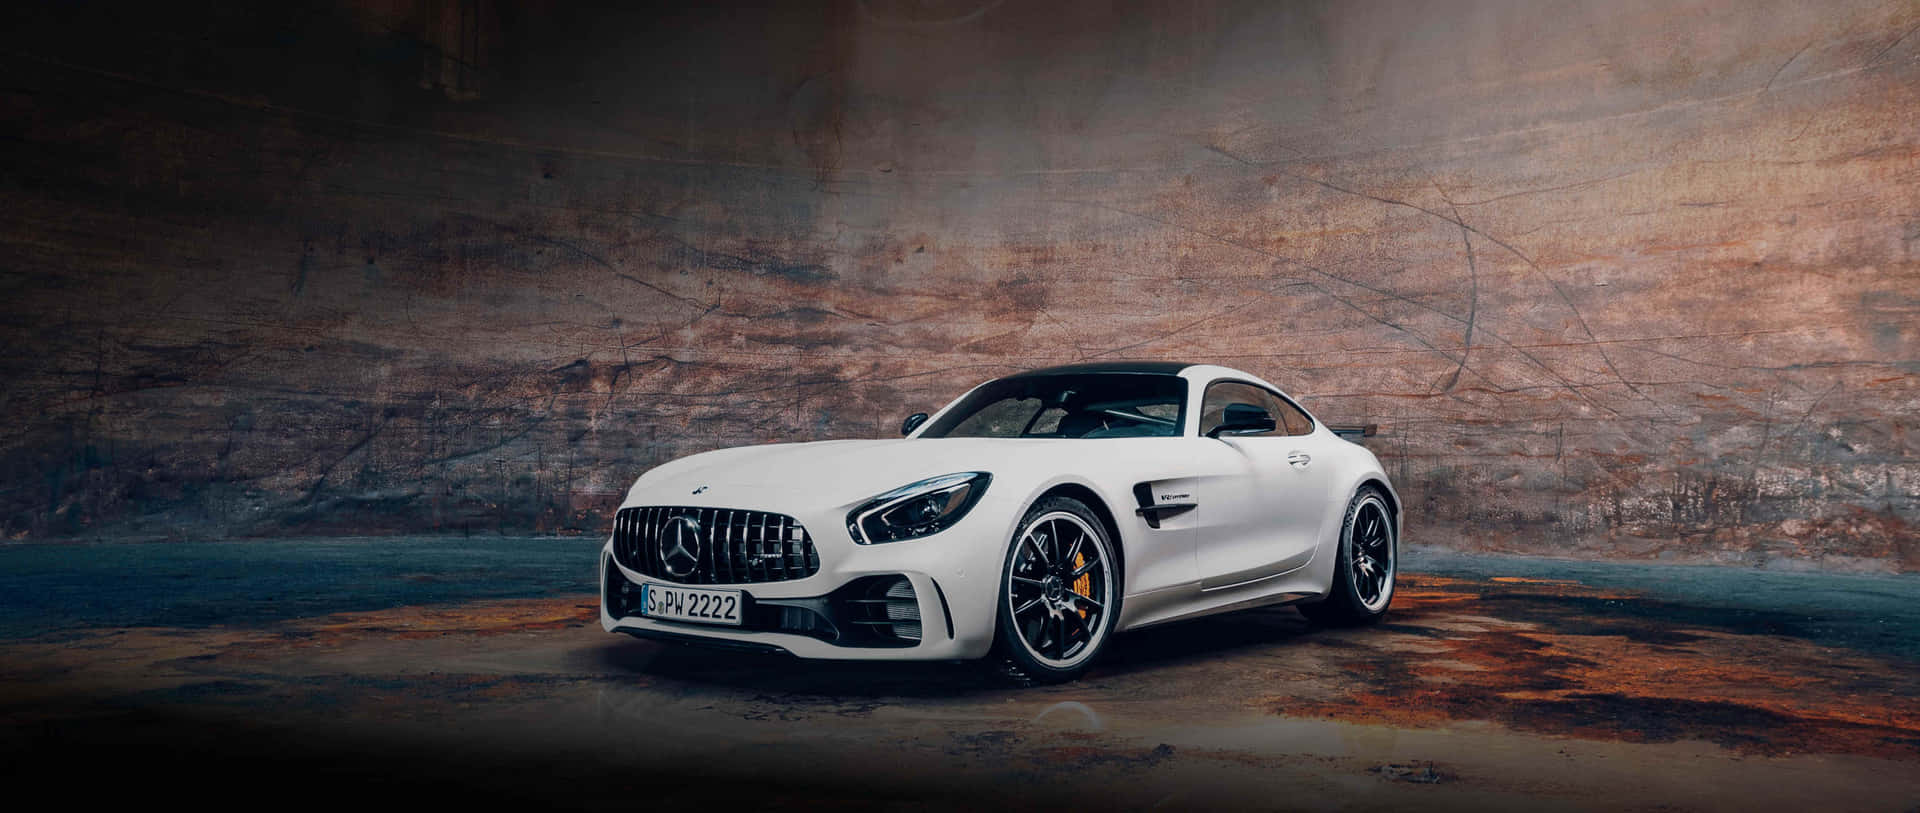 High-performance luxury in the form of the Mercedes-AMG GT. Wallpaper